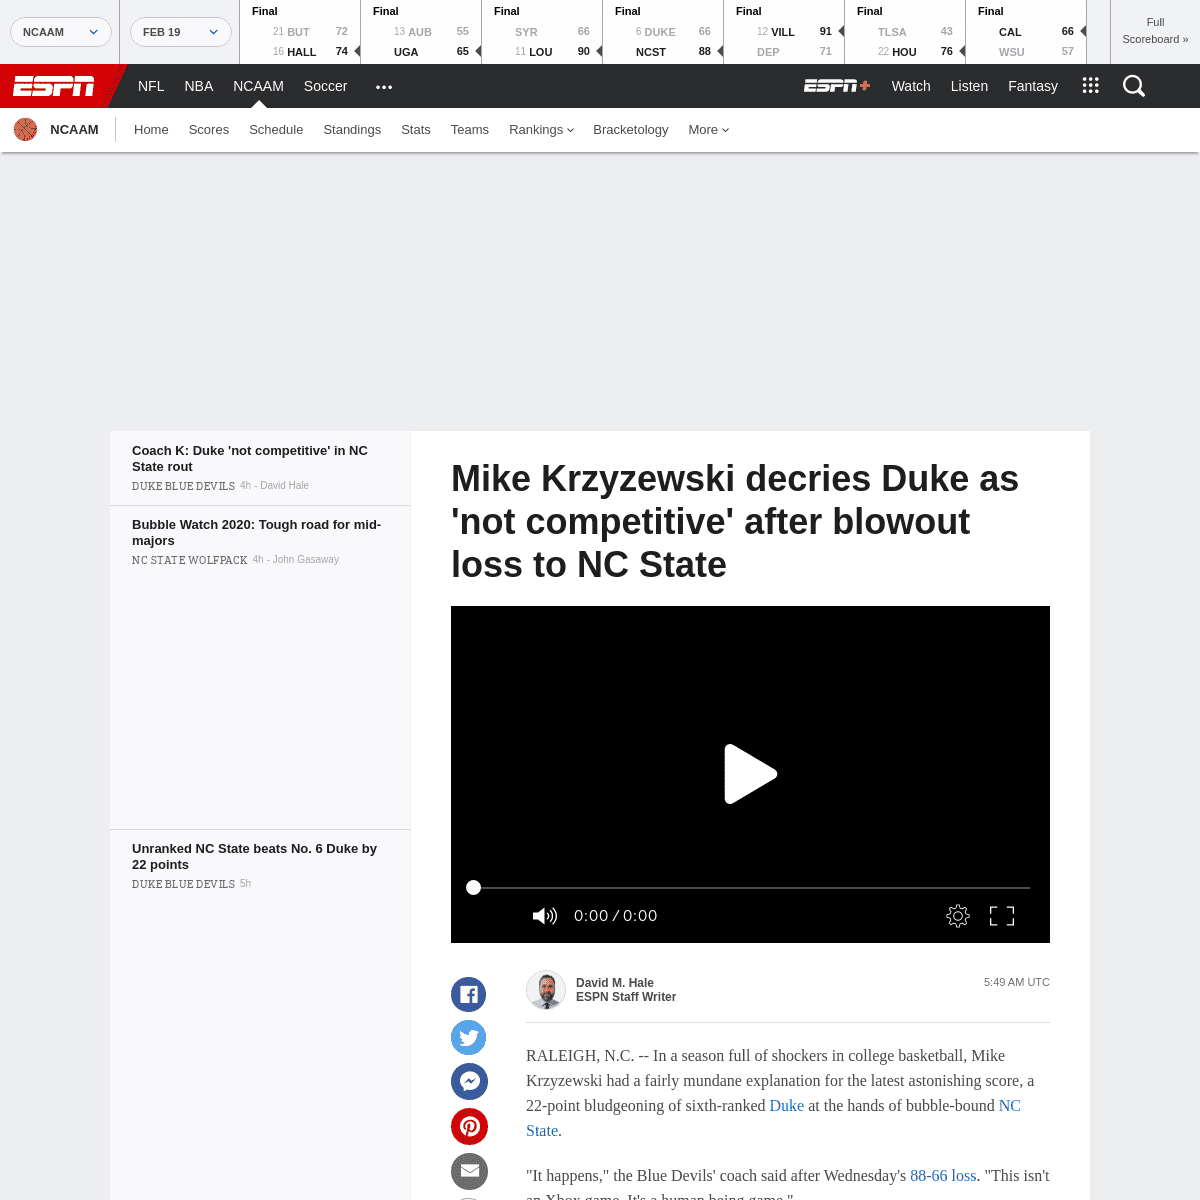 A complete backup of www.espn.com/mens-college-basketball/story/_/id/28741231/mike-krzyzewski-decries-duke-not-competitive-blowo